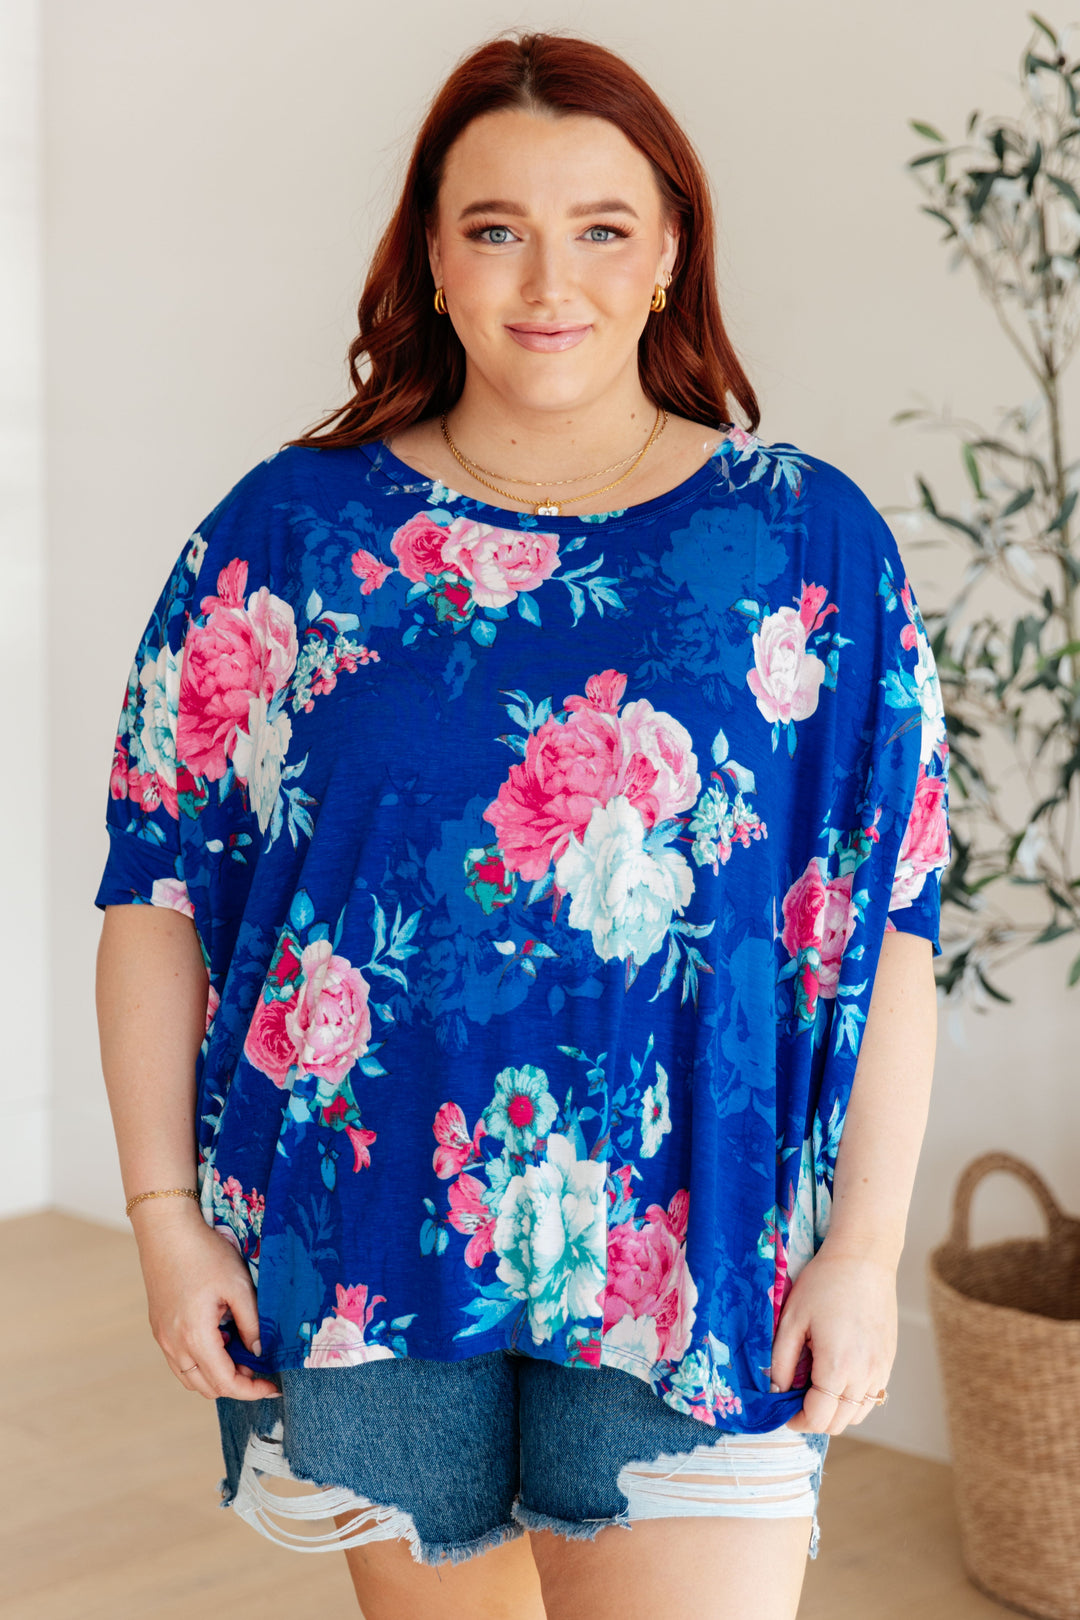 Dear Scarlett Essential Blouse in Royal and Pink Floral - OW *FINAL SALE*